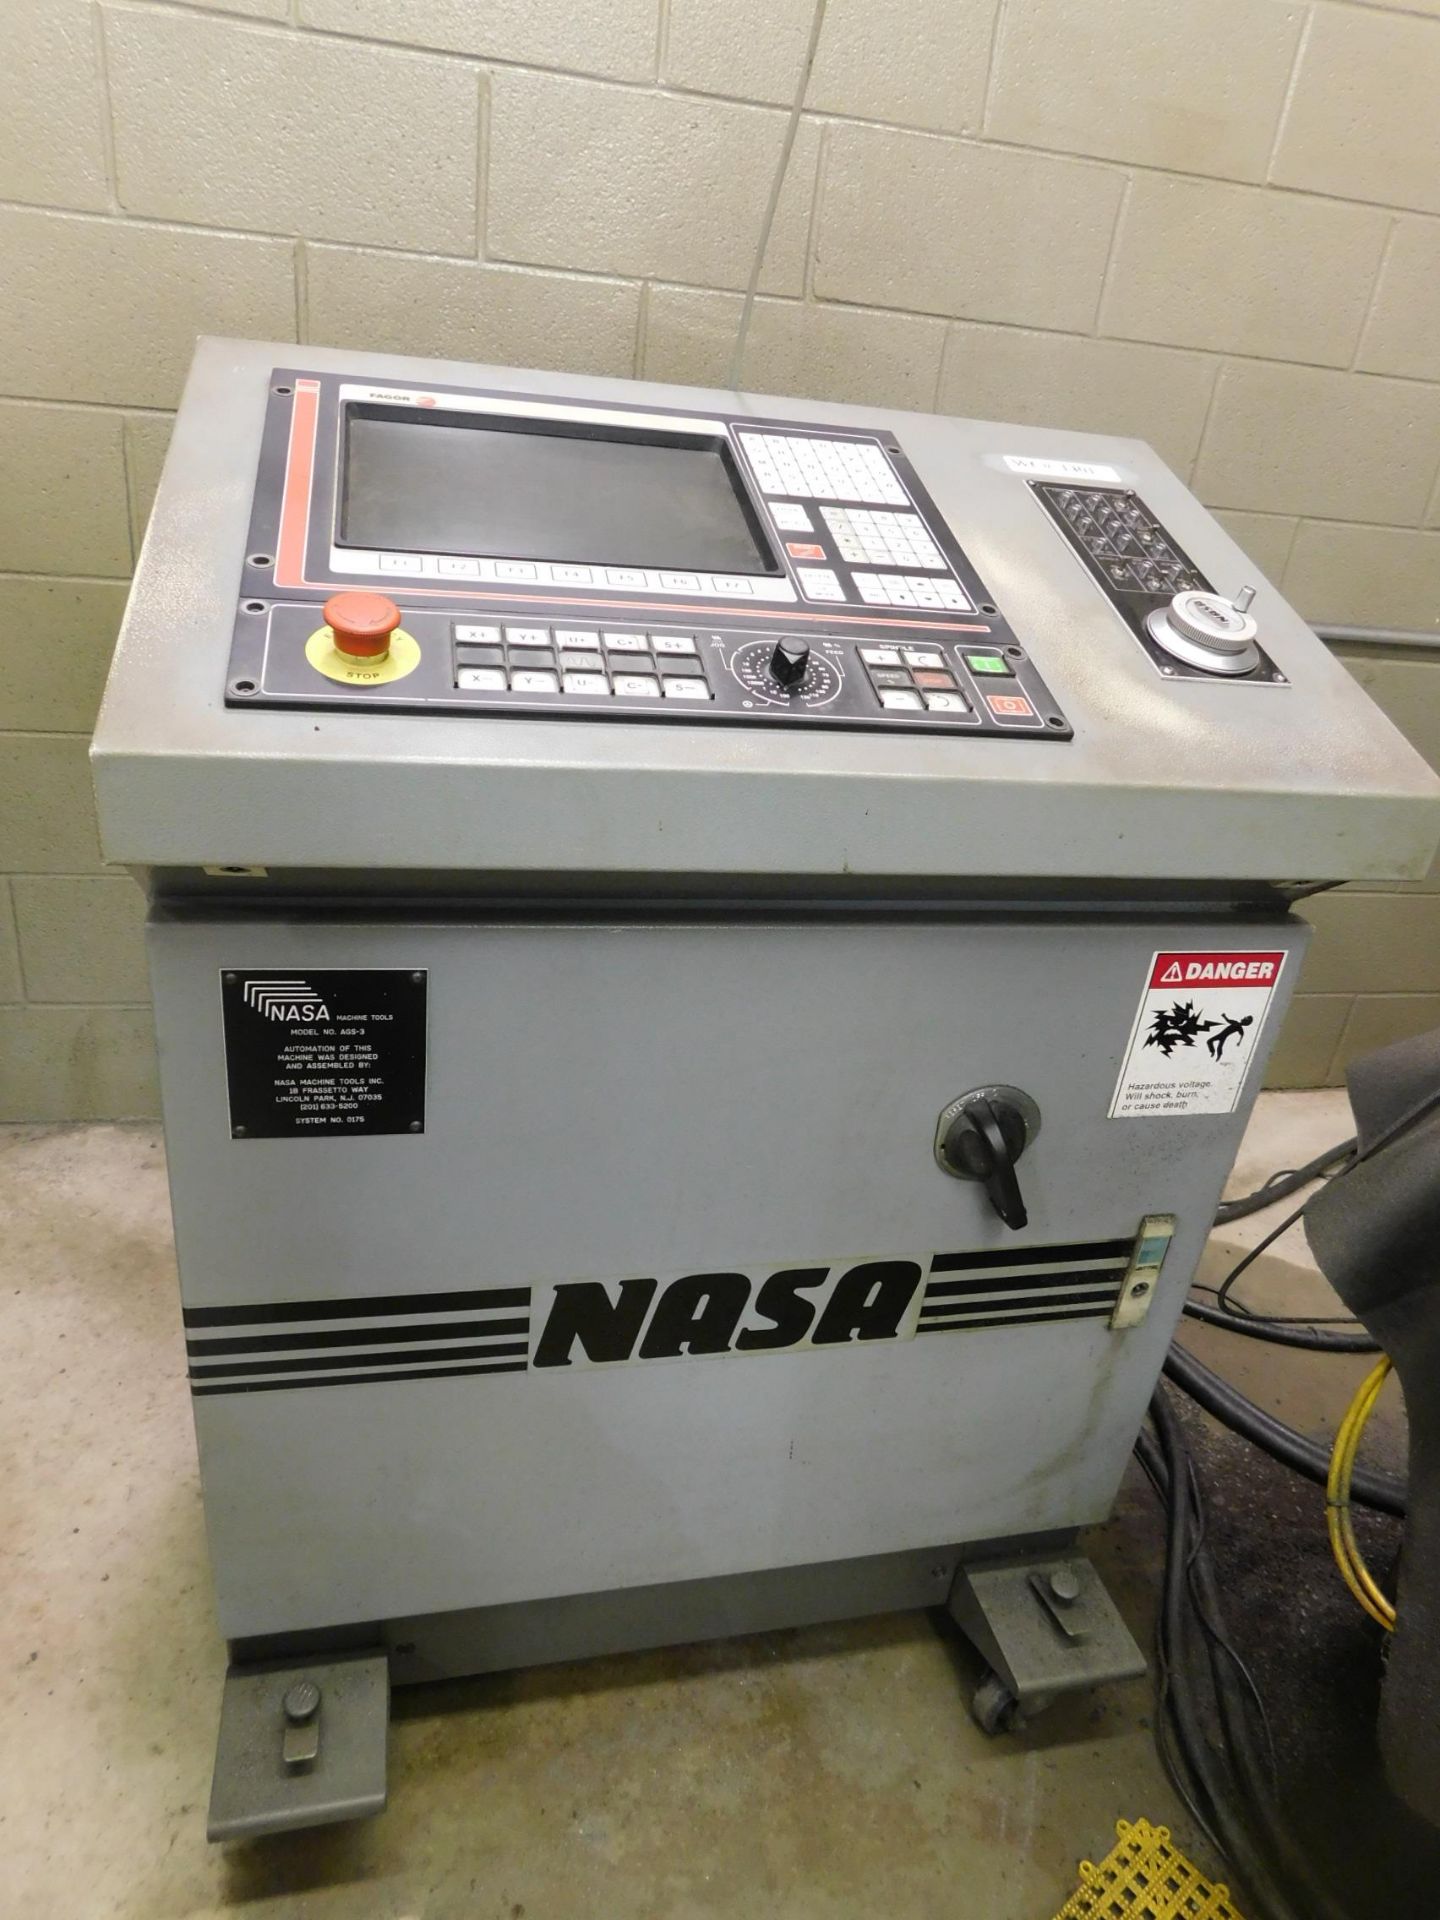 Moore Model #3 CNC Jig Grinder snG163w/NASA/Fagor Model AGS-3 CNC Control (NOT IN SERVICE) - Image 12 of 13